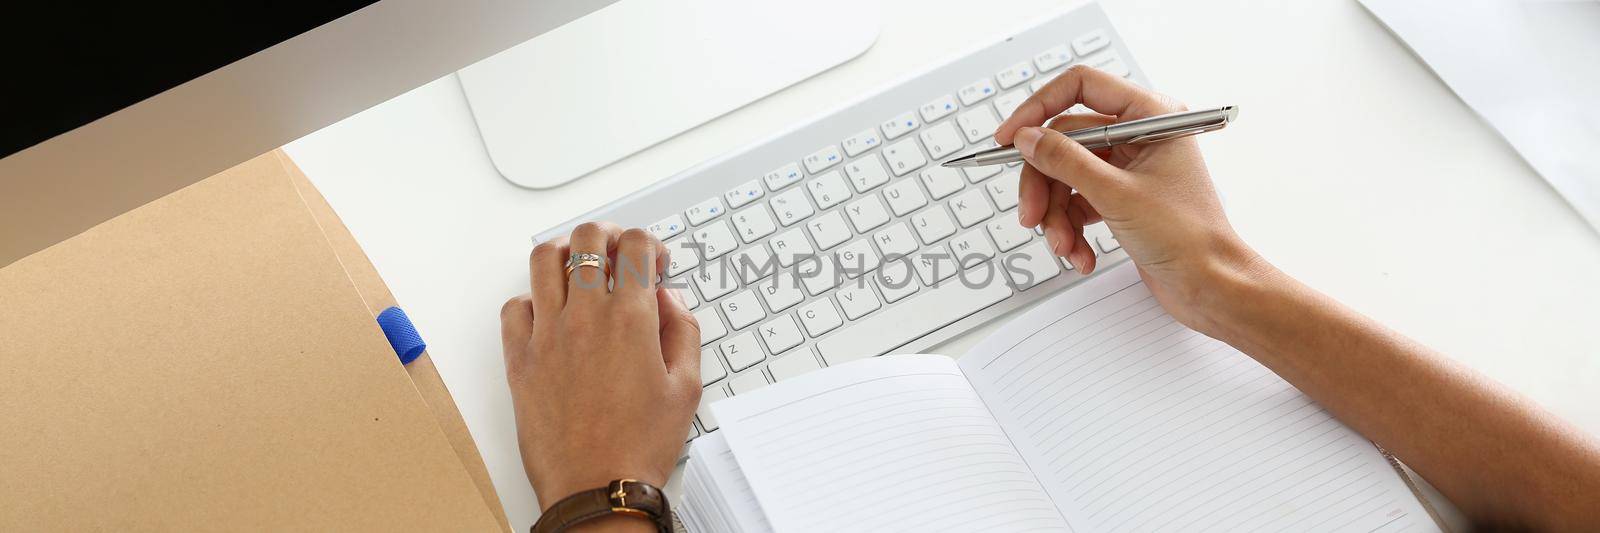 Top view of modern working place with laptop, keyboard, notebook. Woman typing and making notes in open diary. Copy space, mockup, workplace, office, technology, secretary concept